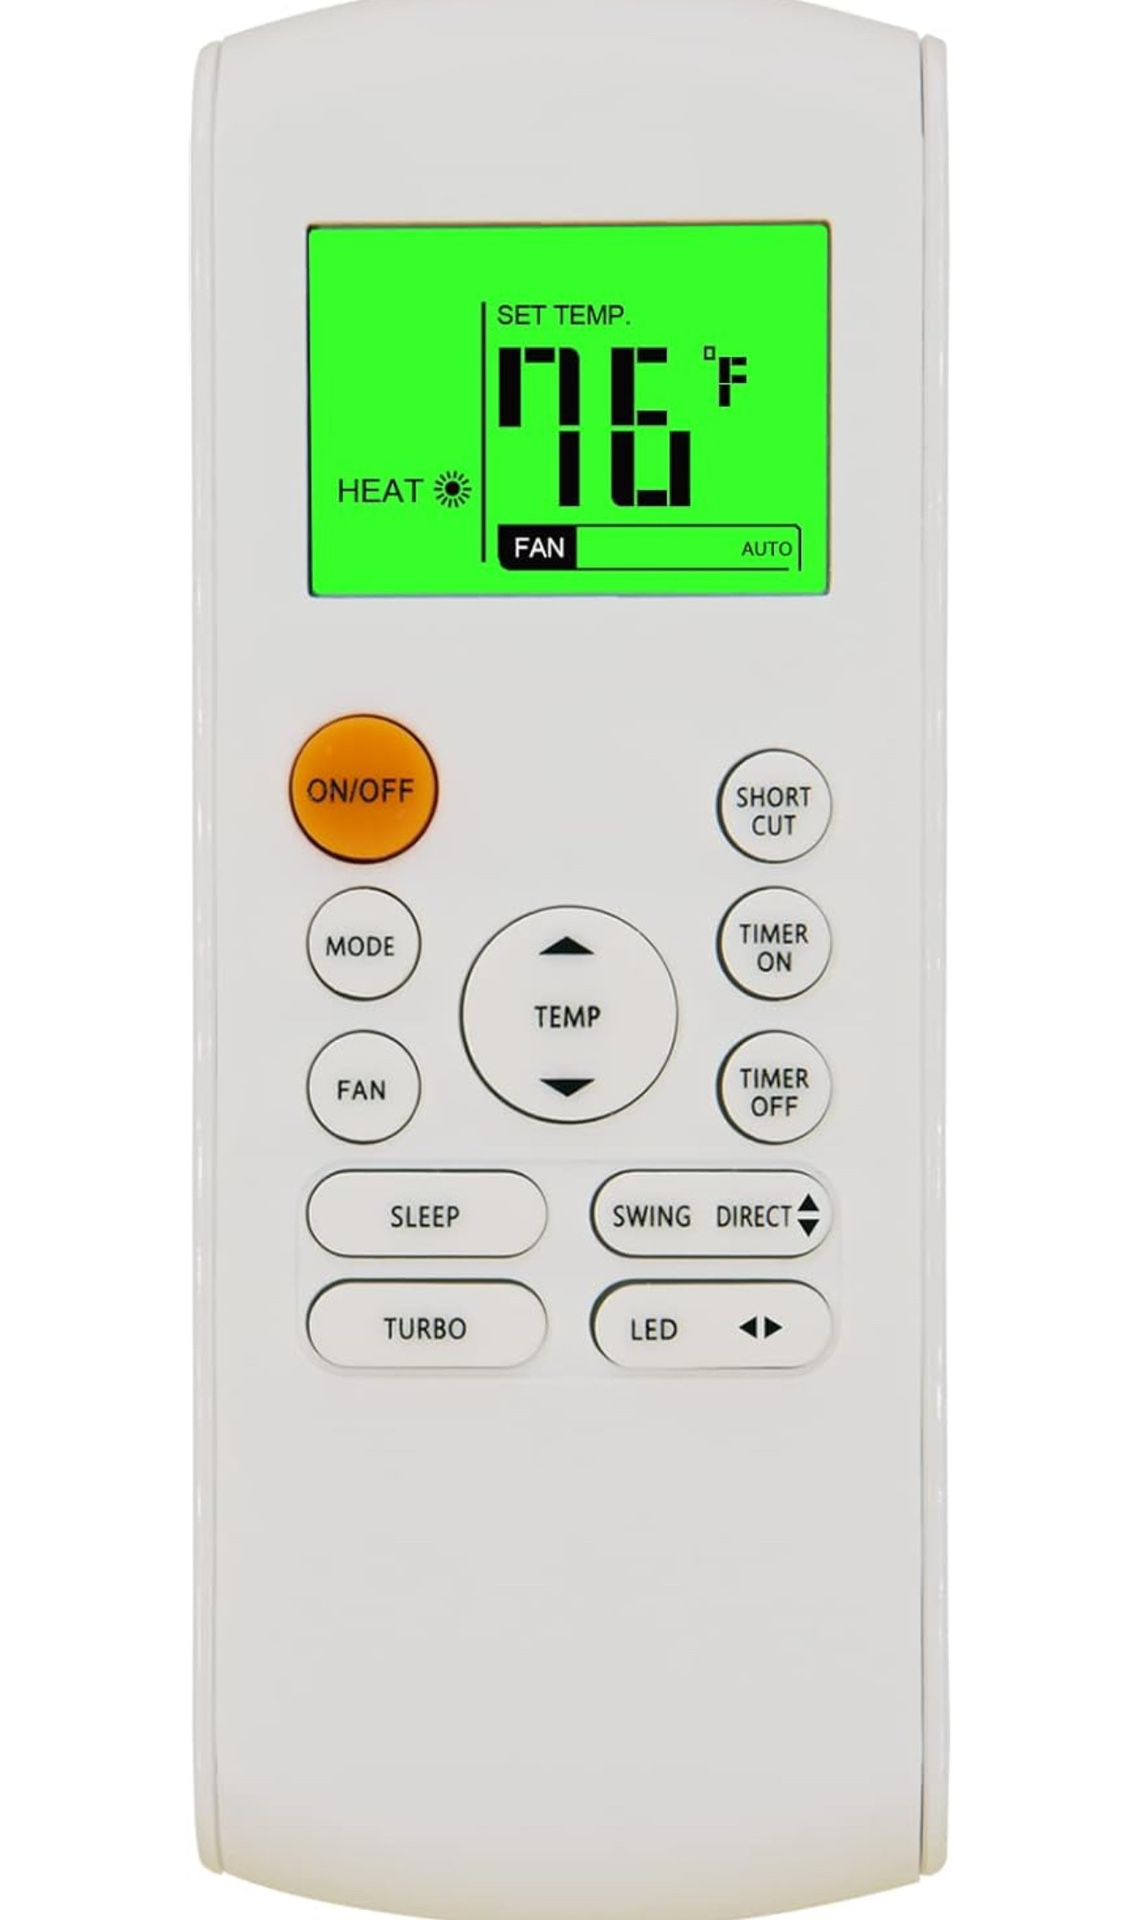 Replacement Remote Control for Midea MRCOOL FRIMEC Klimaire AC Air Conditioner RG57B1/BGE RG57B2/BGE RG57B/BGE RG57/BGE RG57A/BGE RG57A6/BGEF RG57A7/B